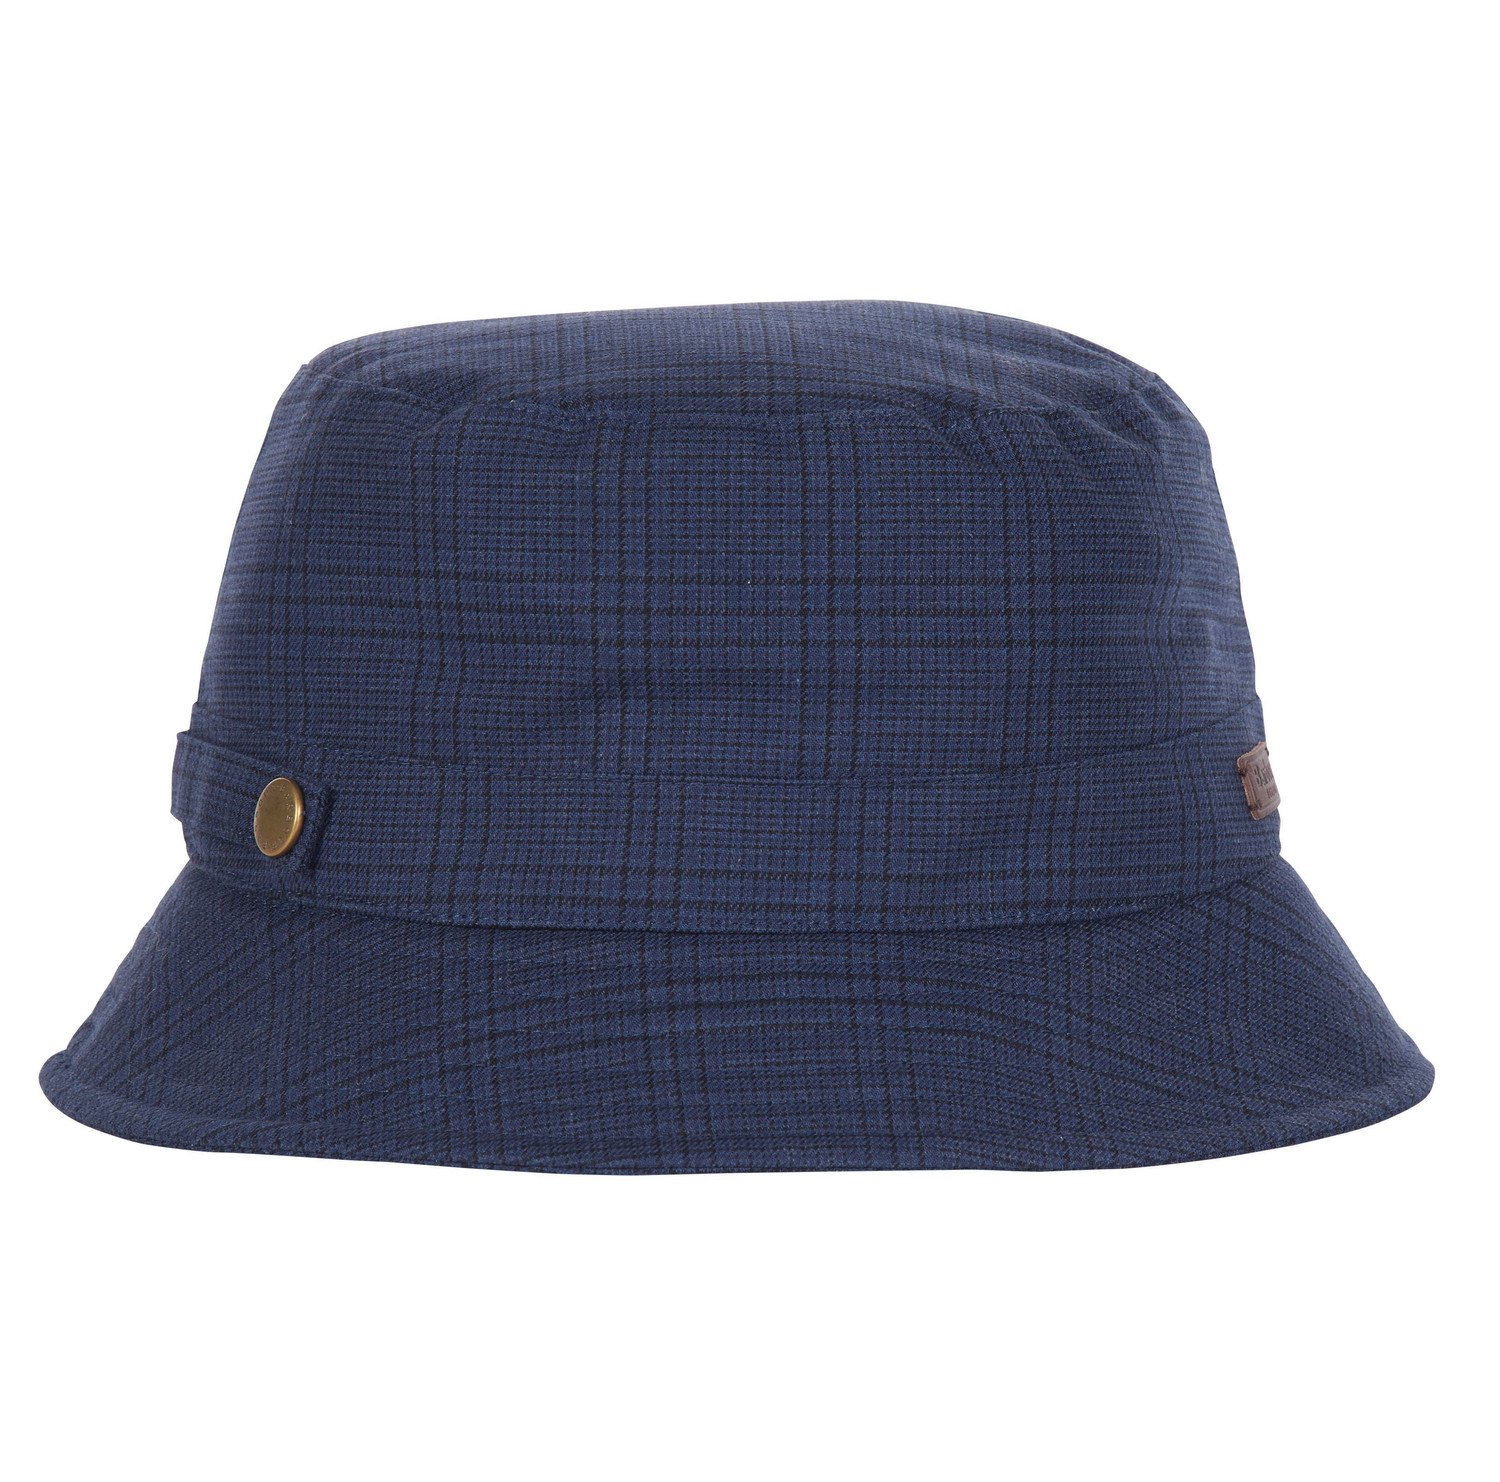 M's Copthorn Sports Hat